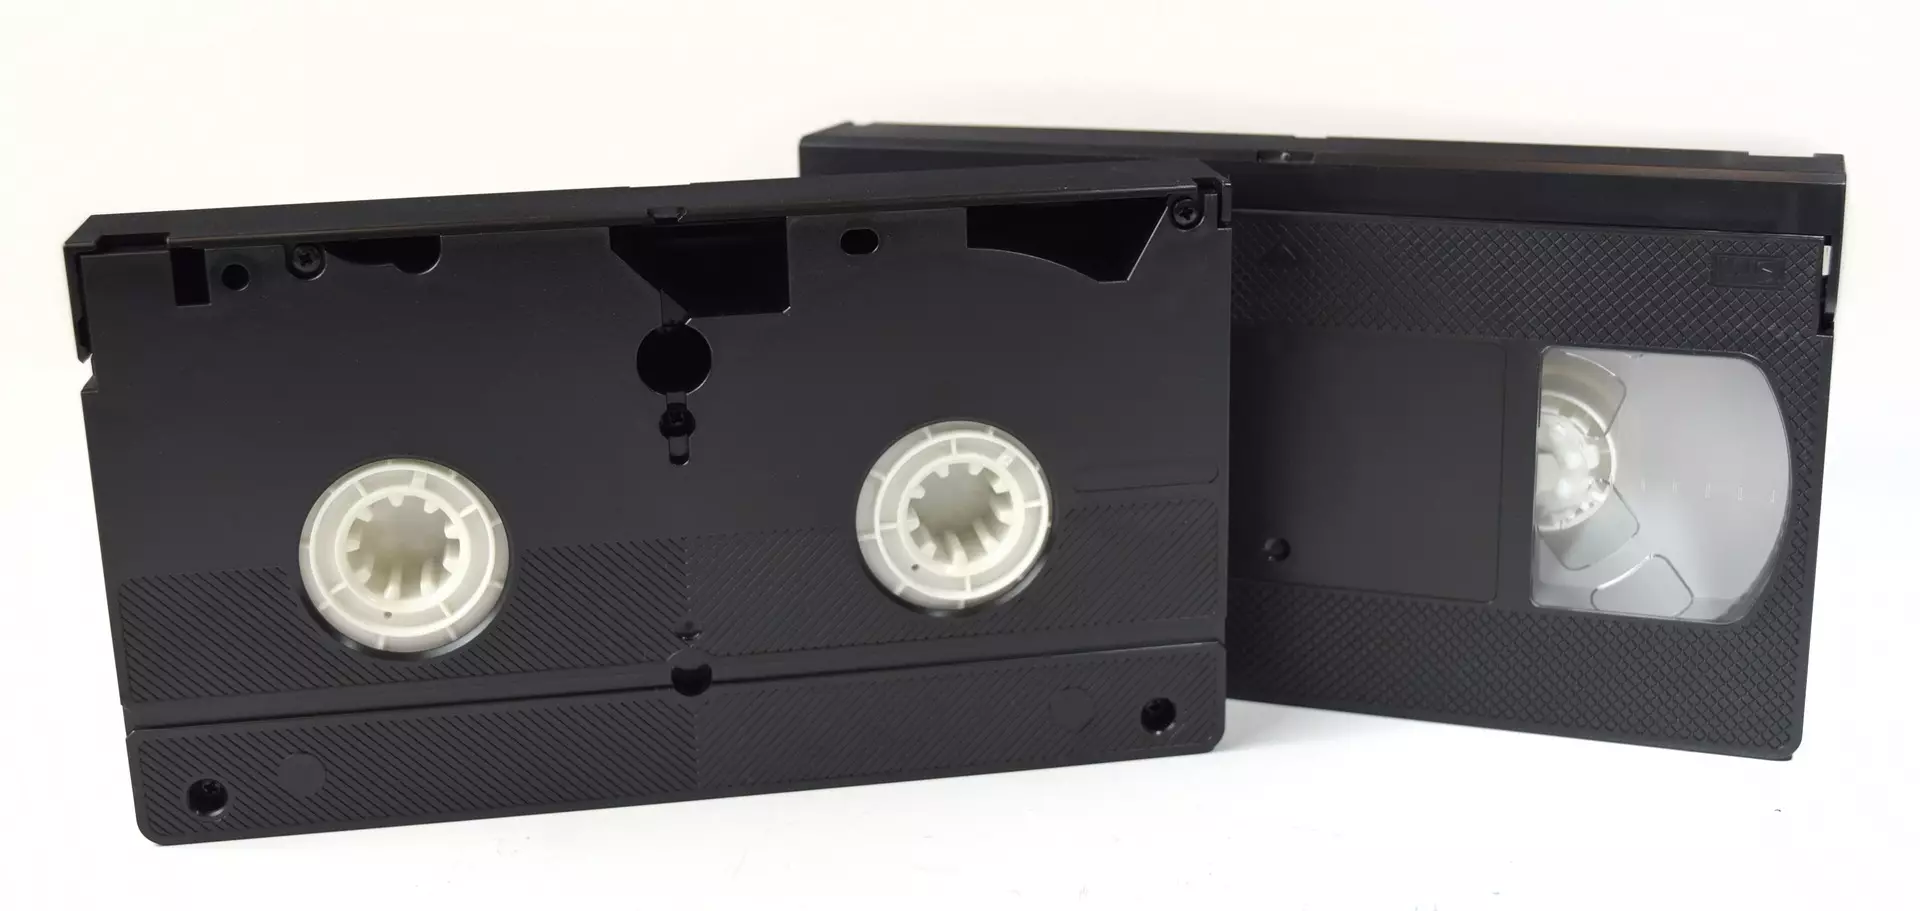 The 15-year-old got a shock when she took a video tape from her parents' bedroom.